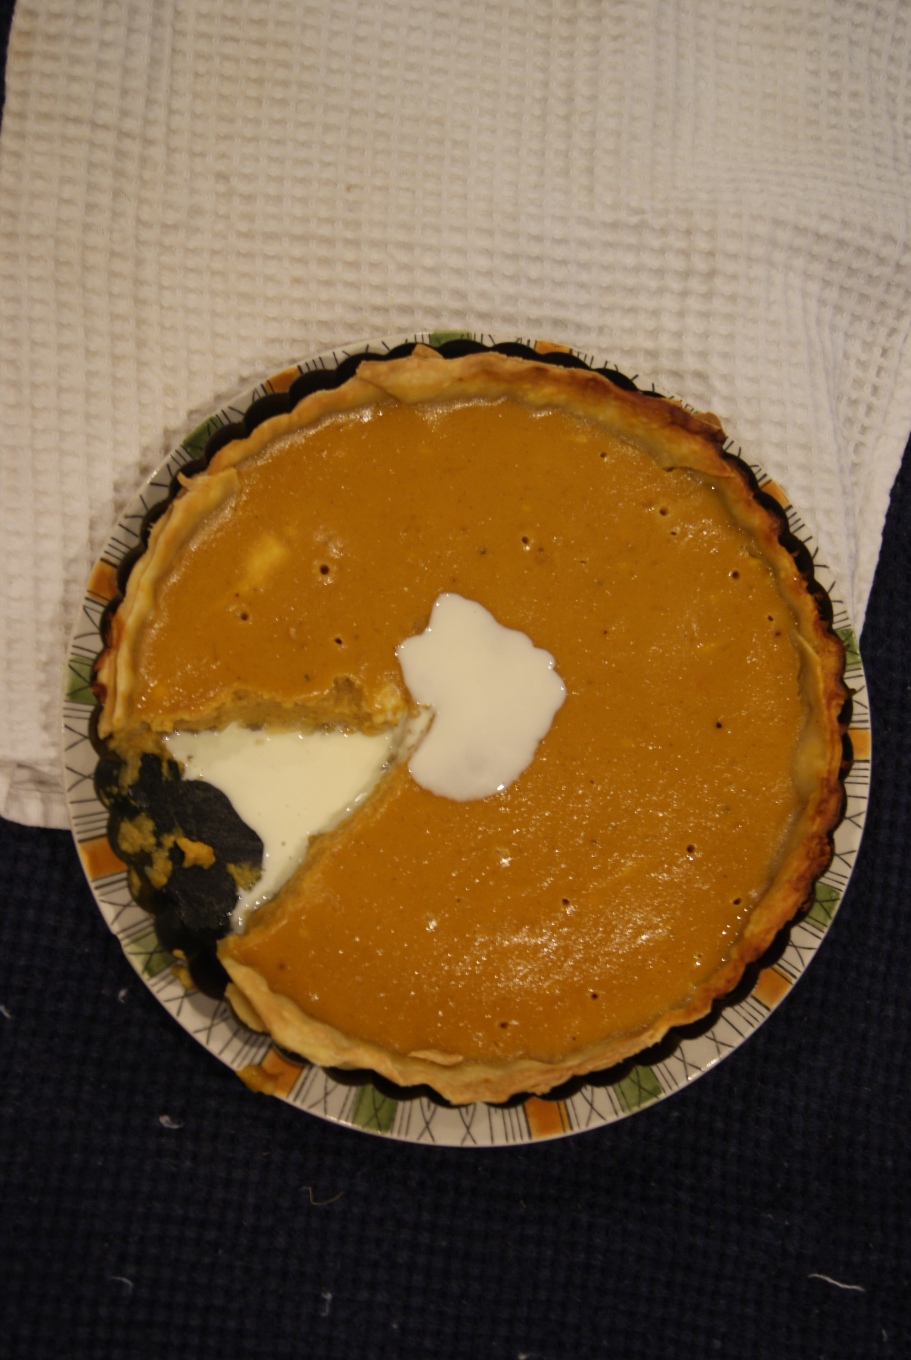 Pumpkin pie and pouring cream